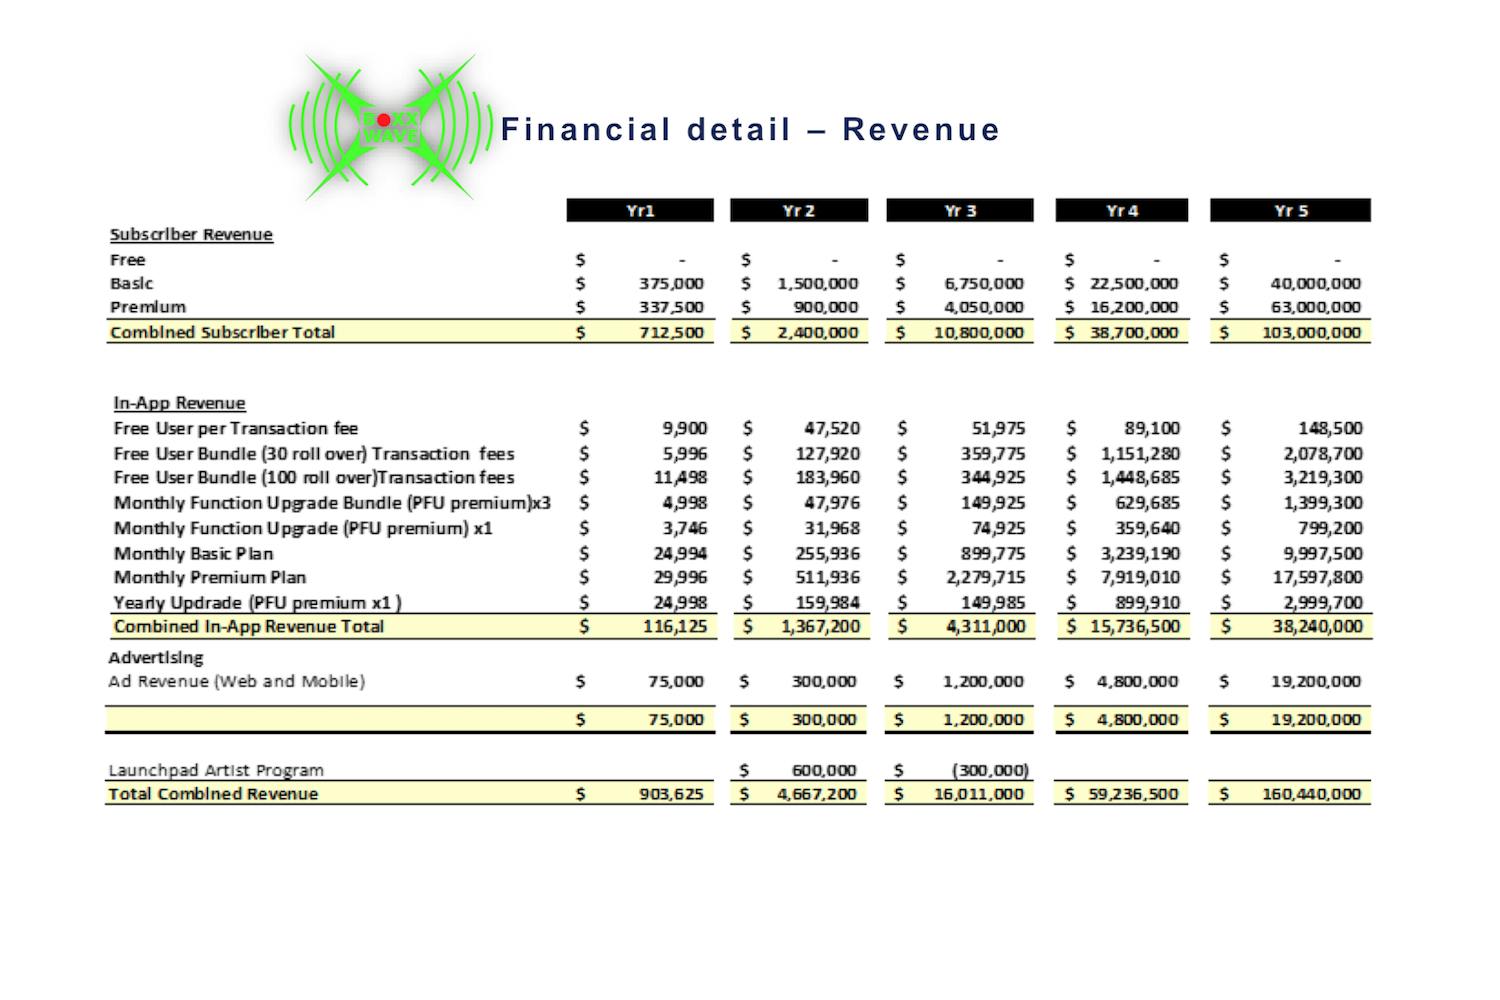 The Boxxwave revenue model proforma built out over 5 years.